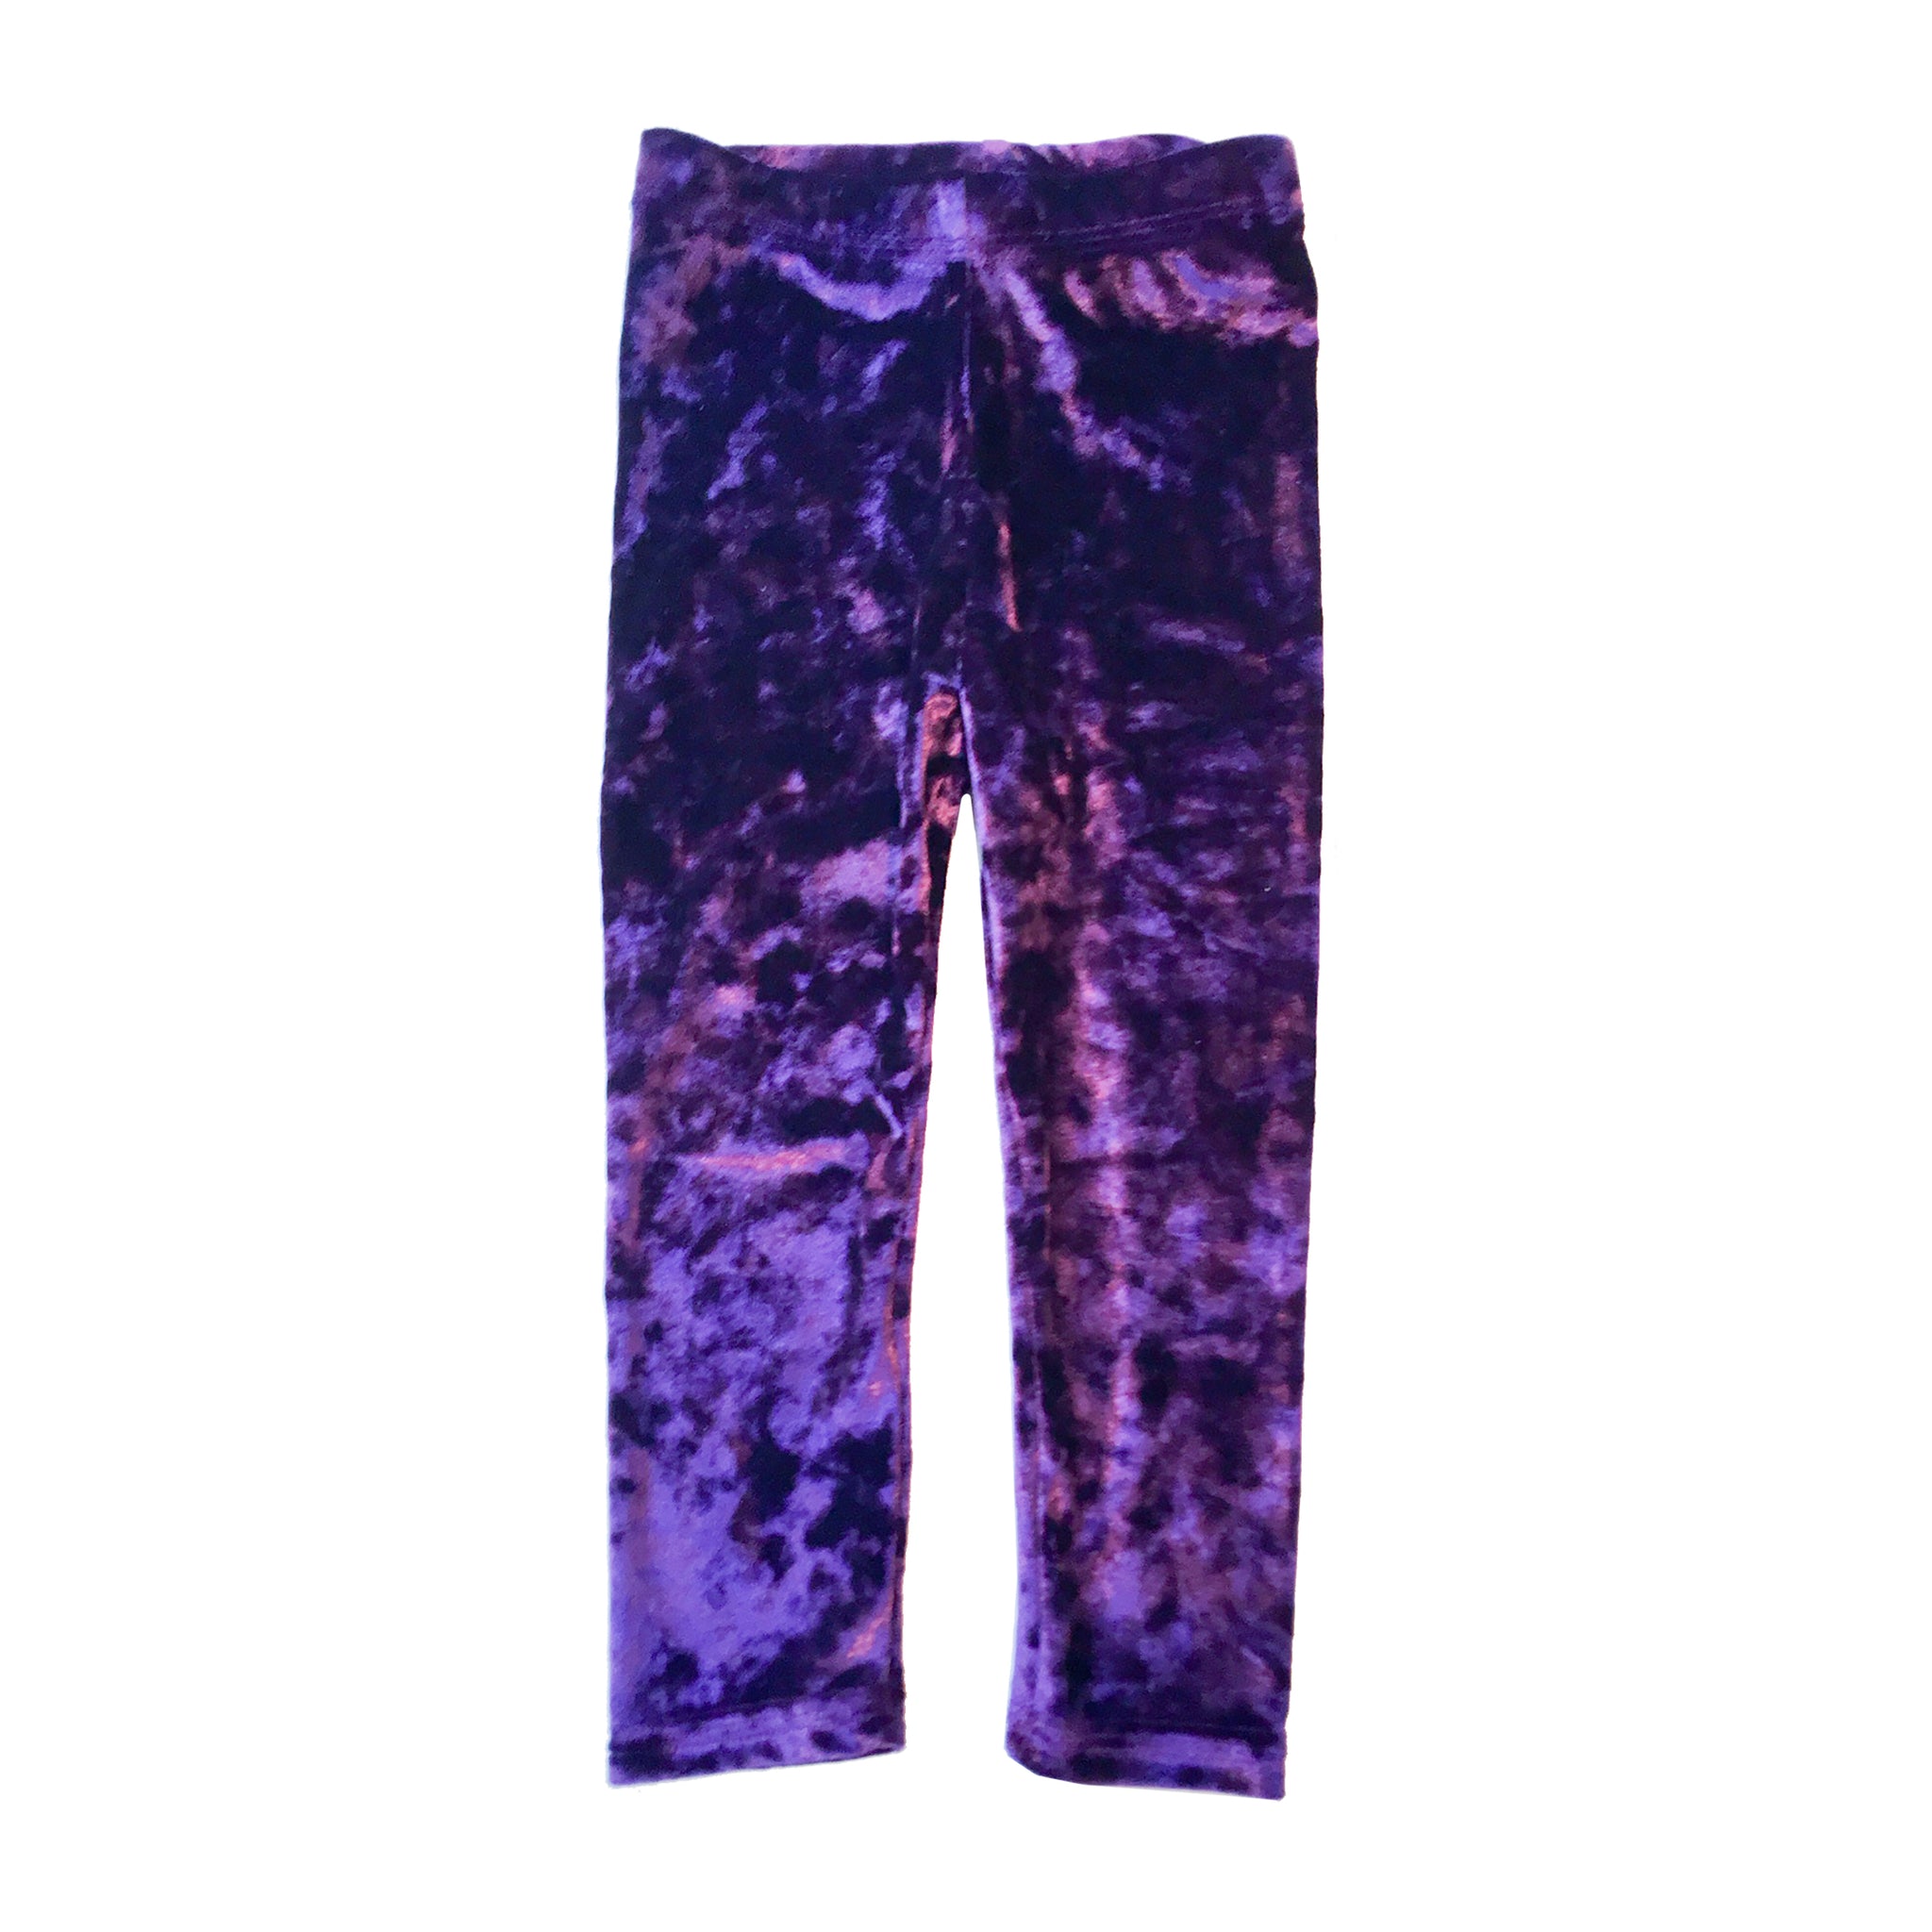 Crushed Velour Leggings for Girls in Purple, Burgundy, Blush and Silver Sizes 9m-8y